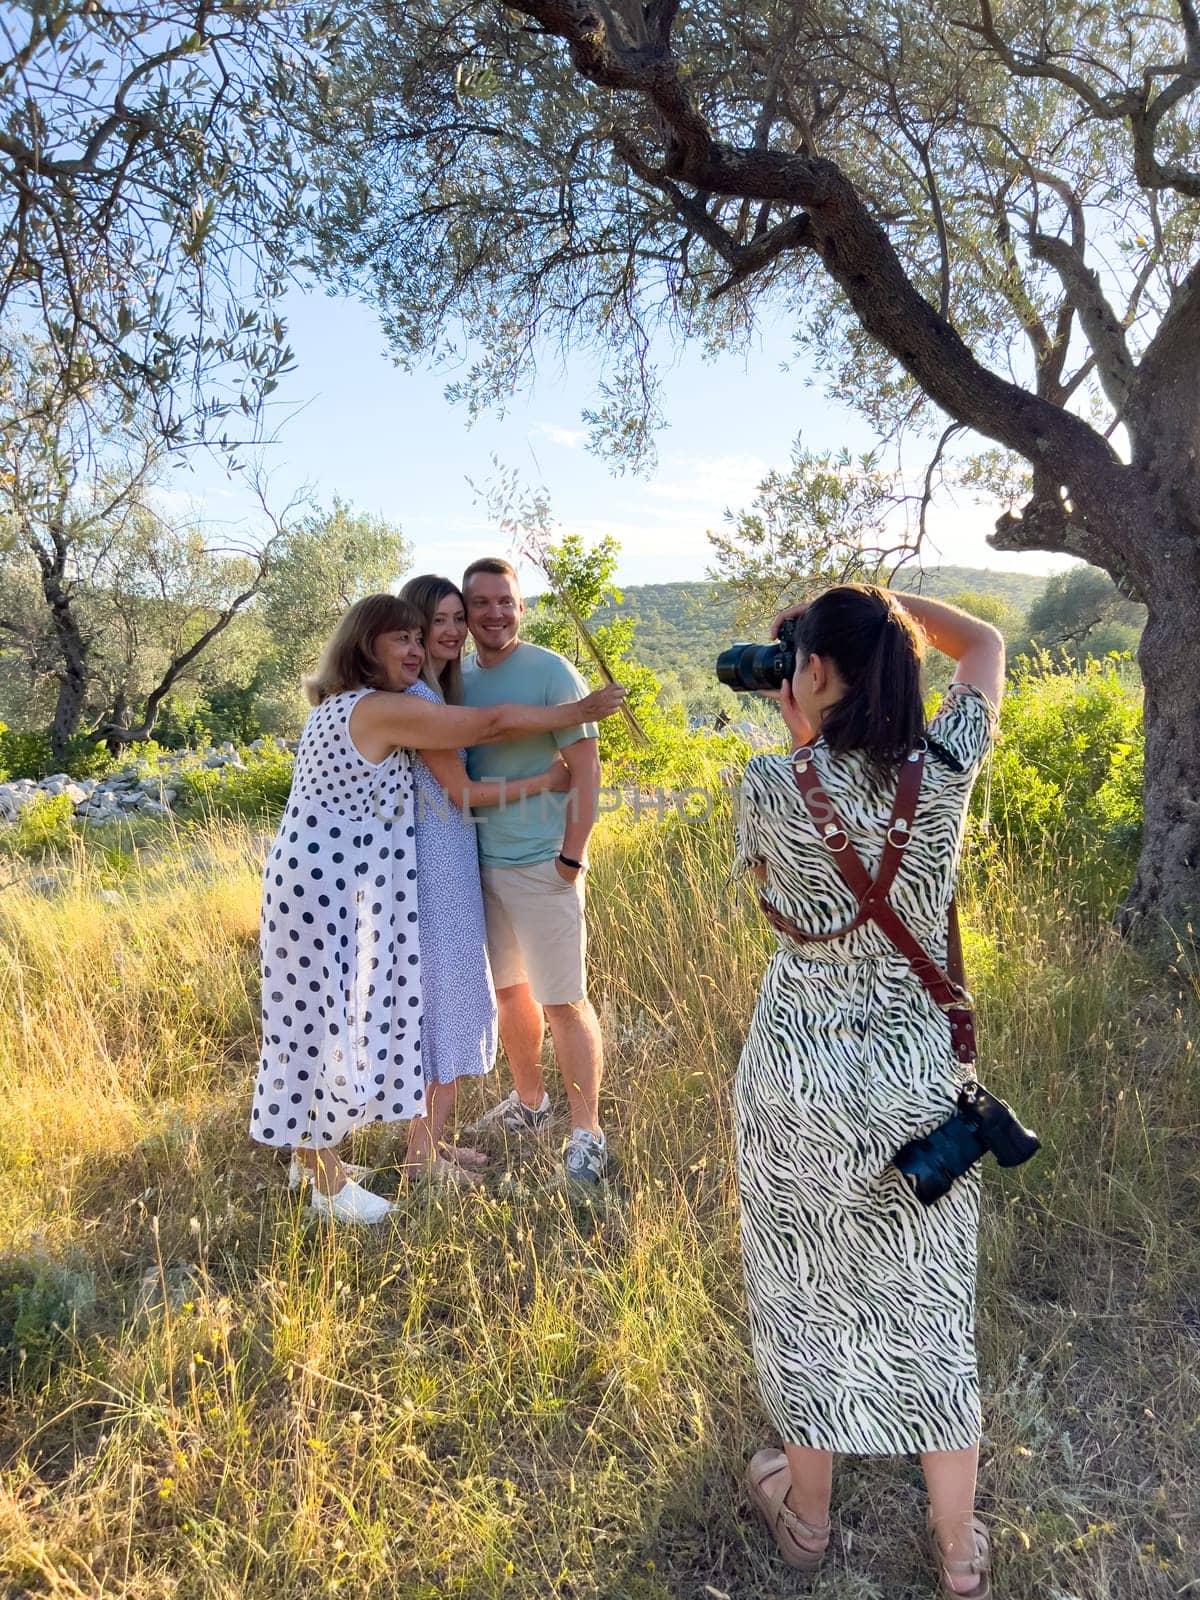 Girl photographer takes pictures of an elderly woman hugging a couple. High quality photo